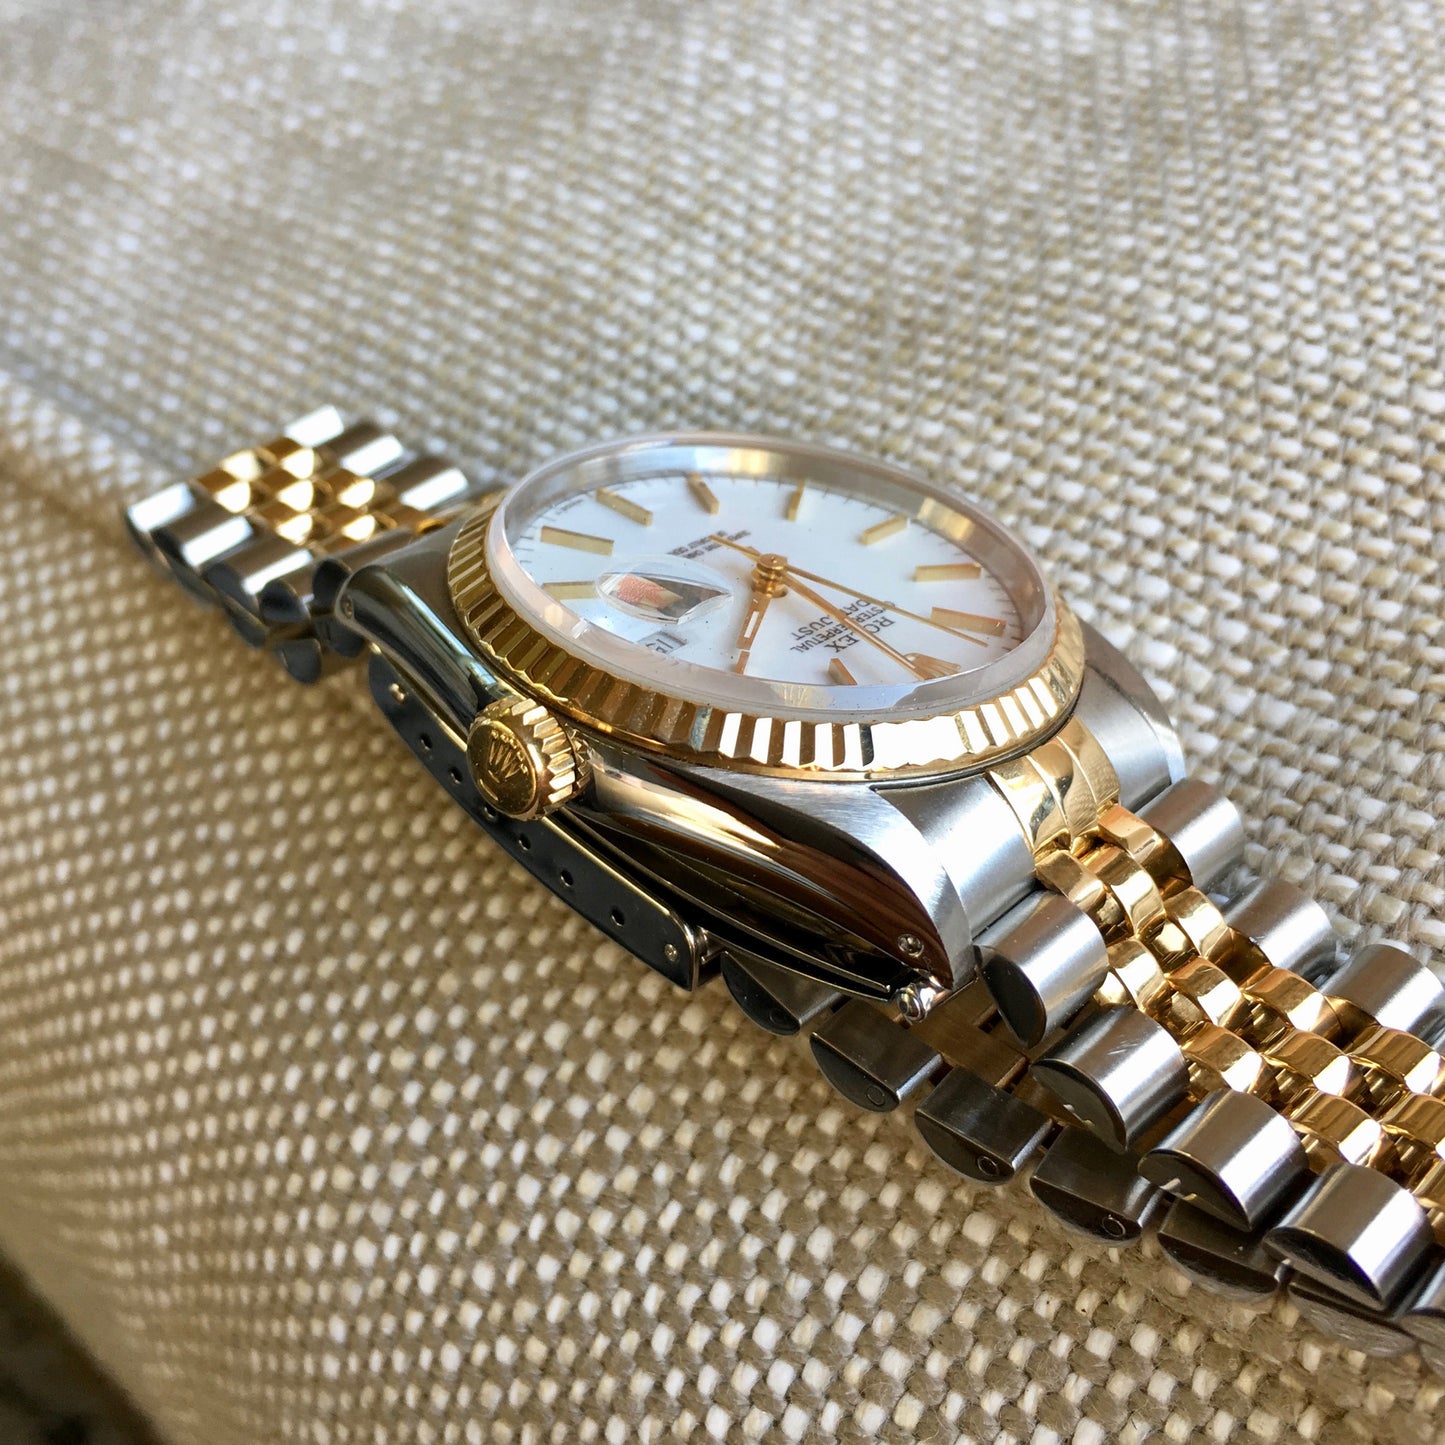 Rolex Datejust 16233 White Stick Two Tone Cal. 3135 "S" 1993 Serial Watch - Hashtag Watch Company